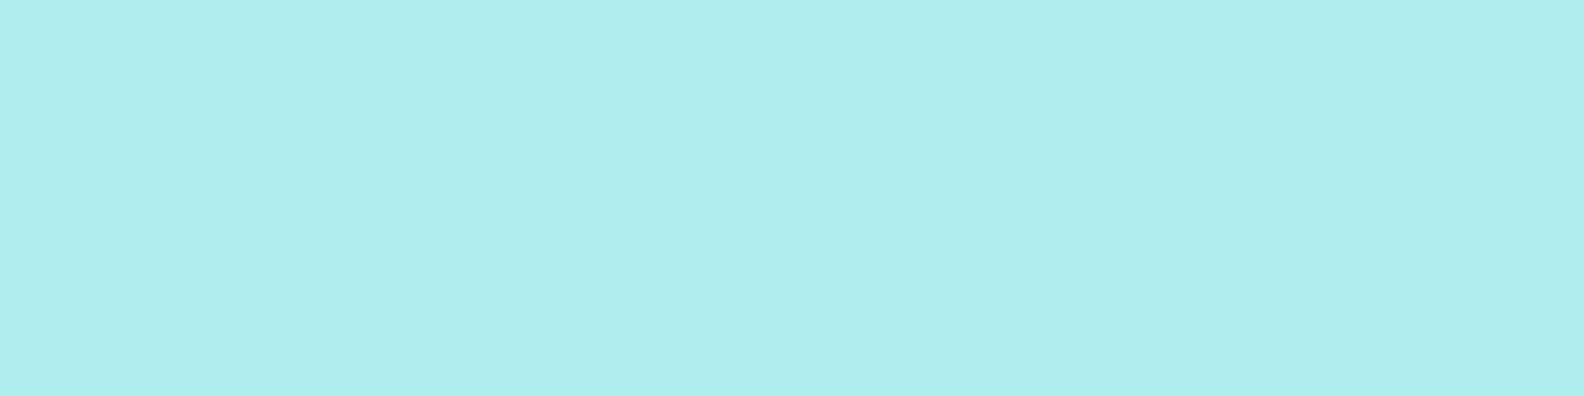 1584x396 Pale Turquoise Solid Color Background